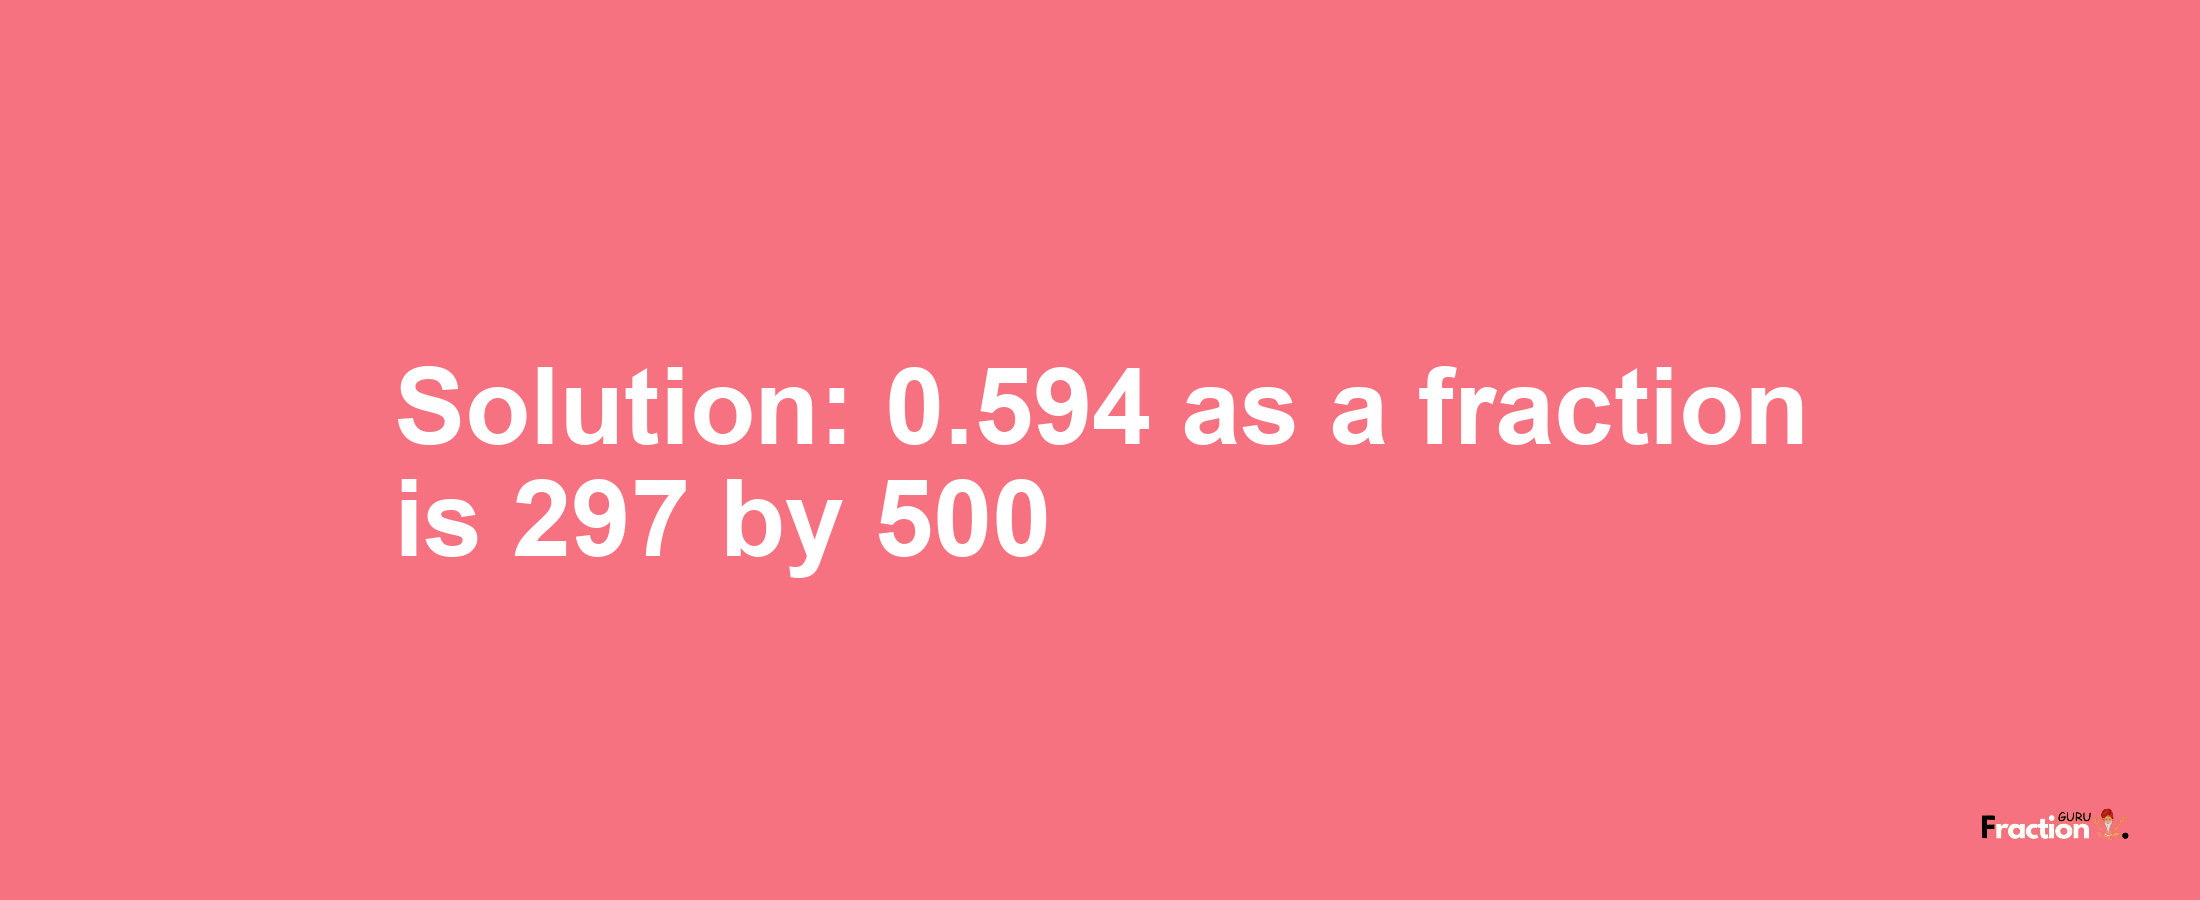 Solution:0.594 as a fraction is 297/500